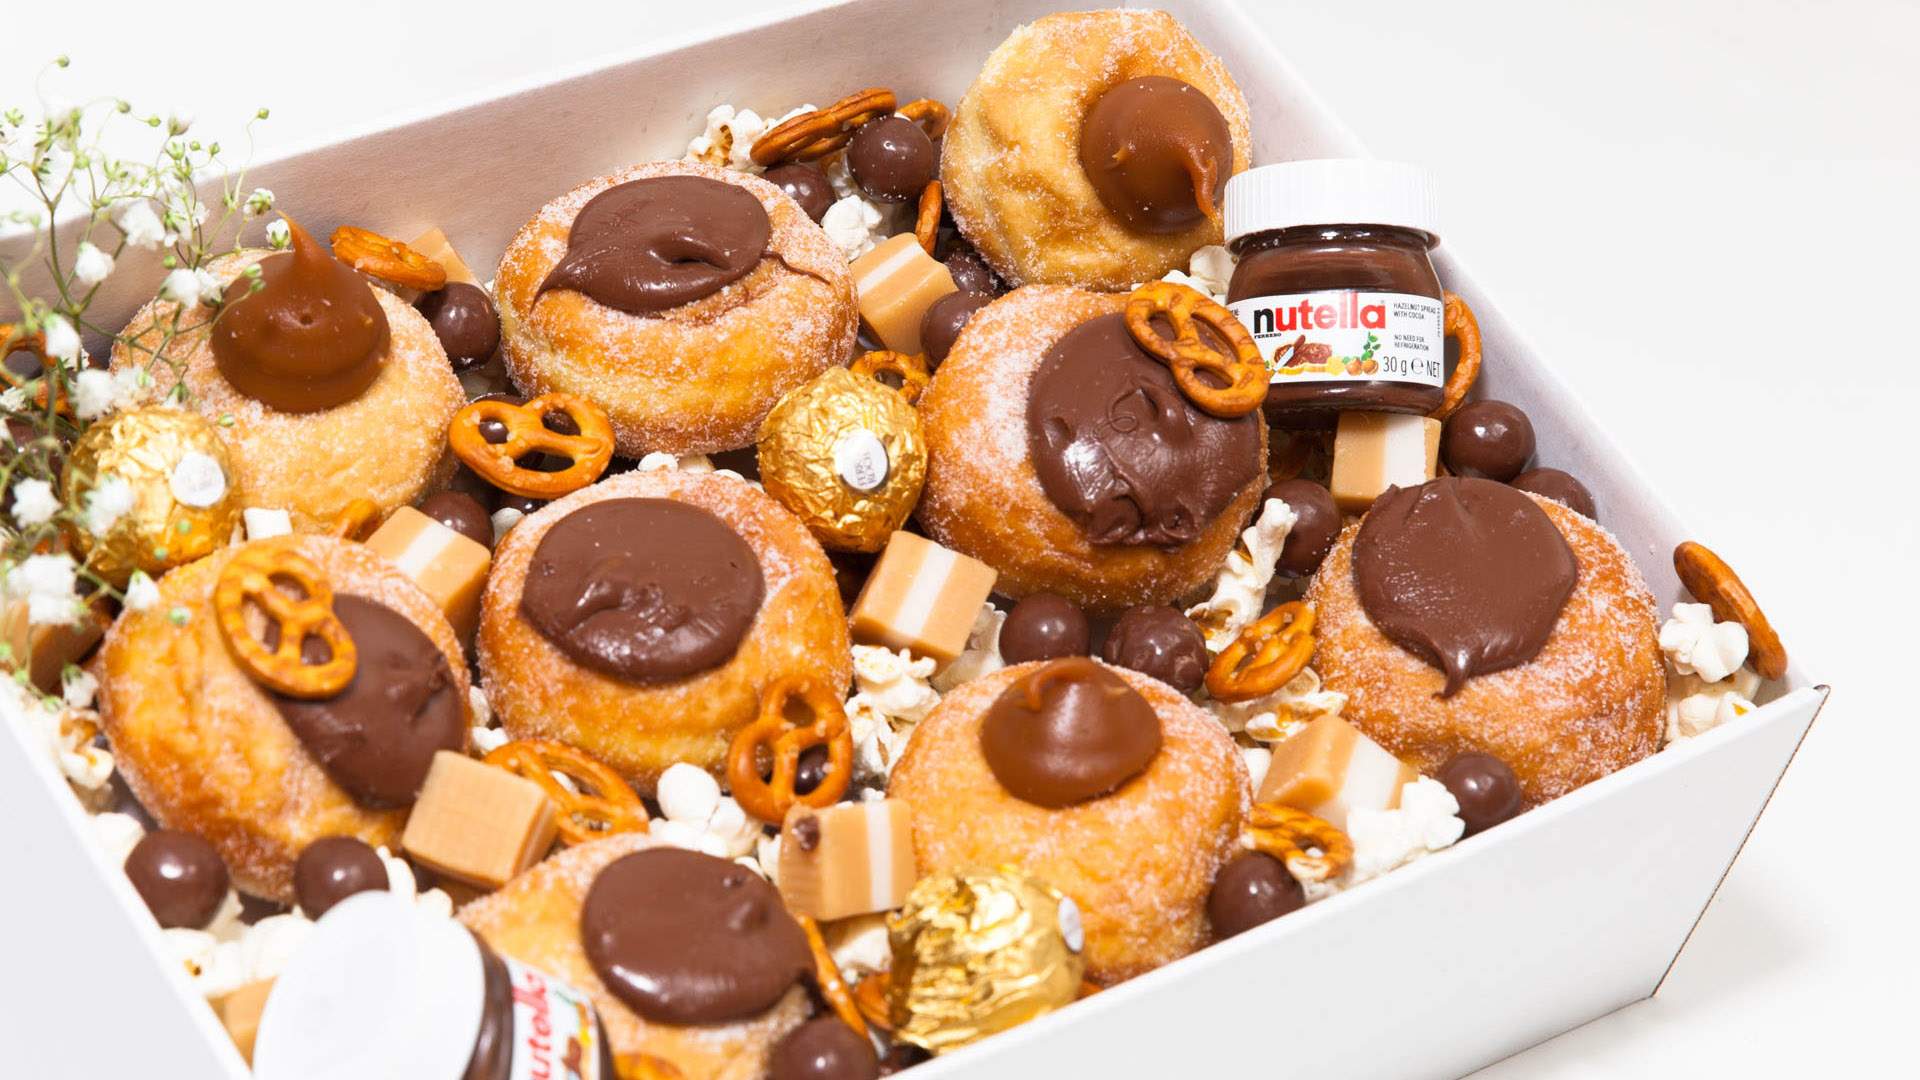 Sweety's Treat Boxes Is Brisbane's New Dedicated Doughnut Delivery Service